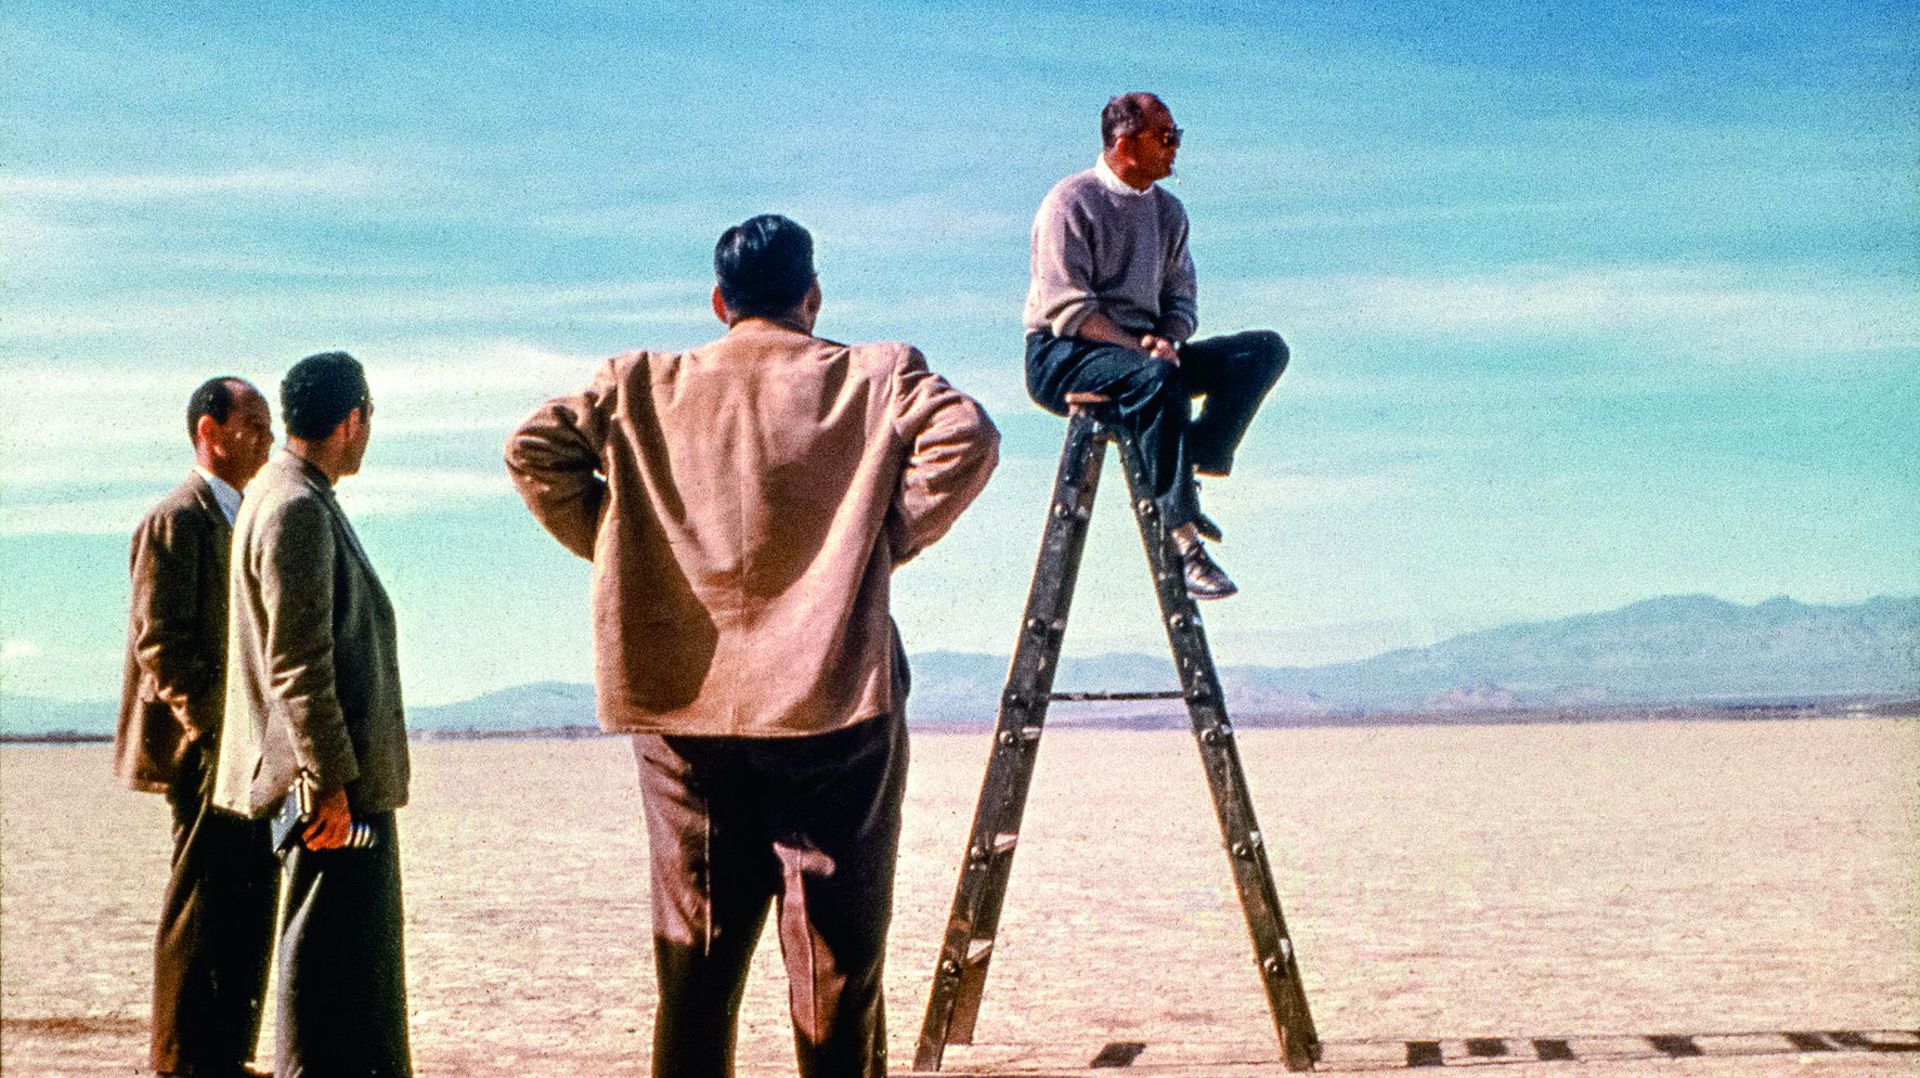 Billy Wilder in the middle of the picture on the ladder